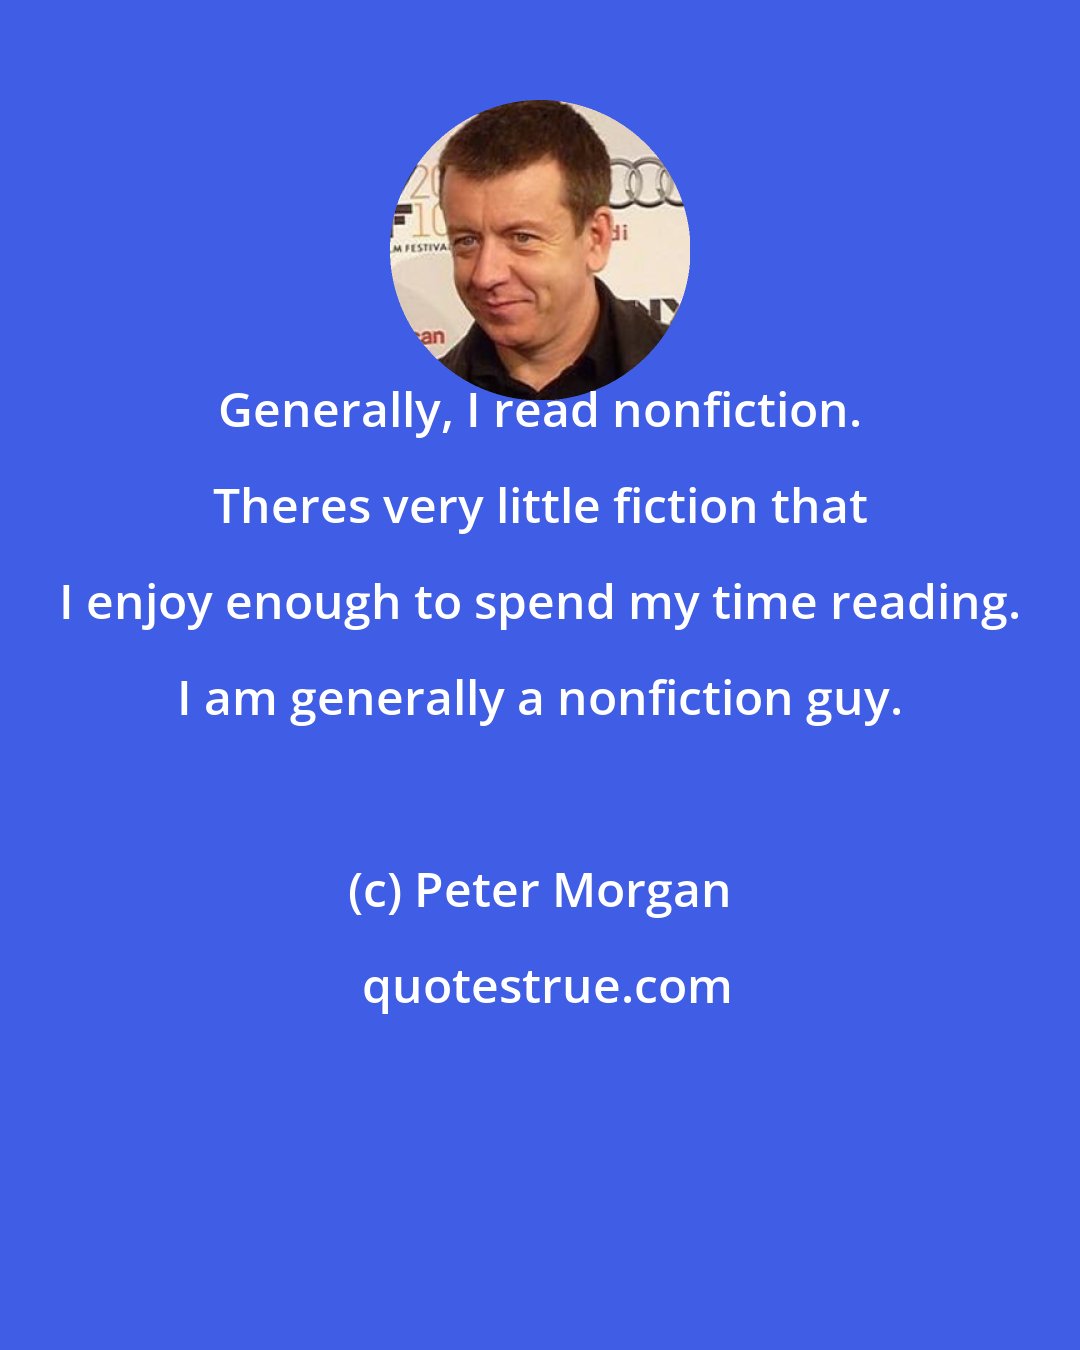 Peter Morgan: Generally, I read nonfiction. Theres very little fiction that I enjoy enough to spend my time reading. I am generally a nonfiction guy.